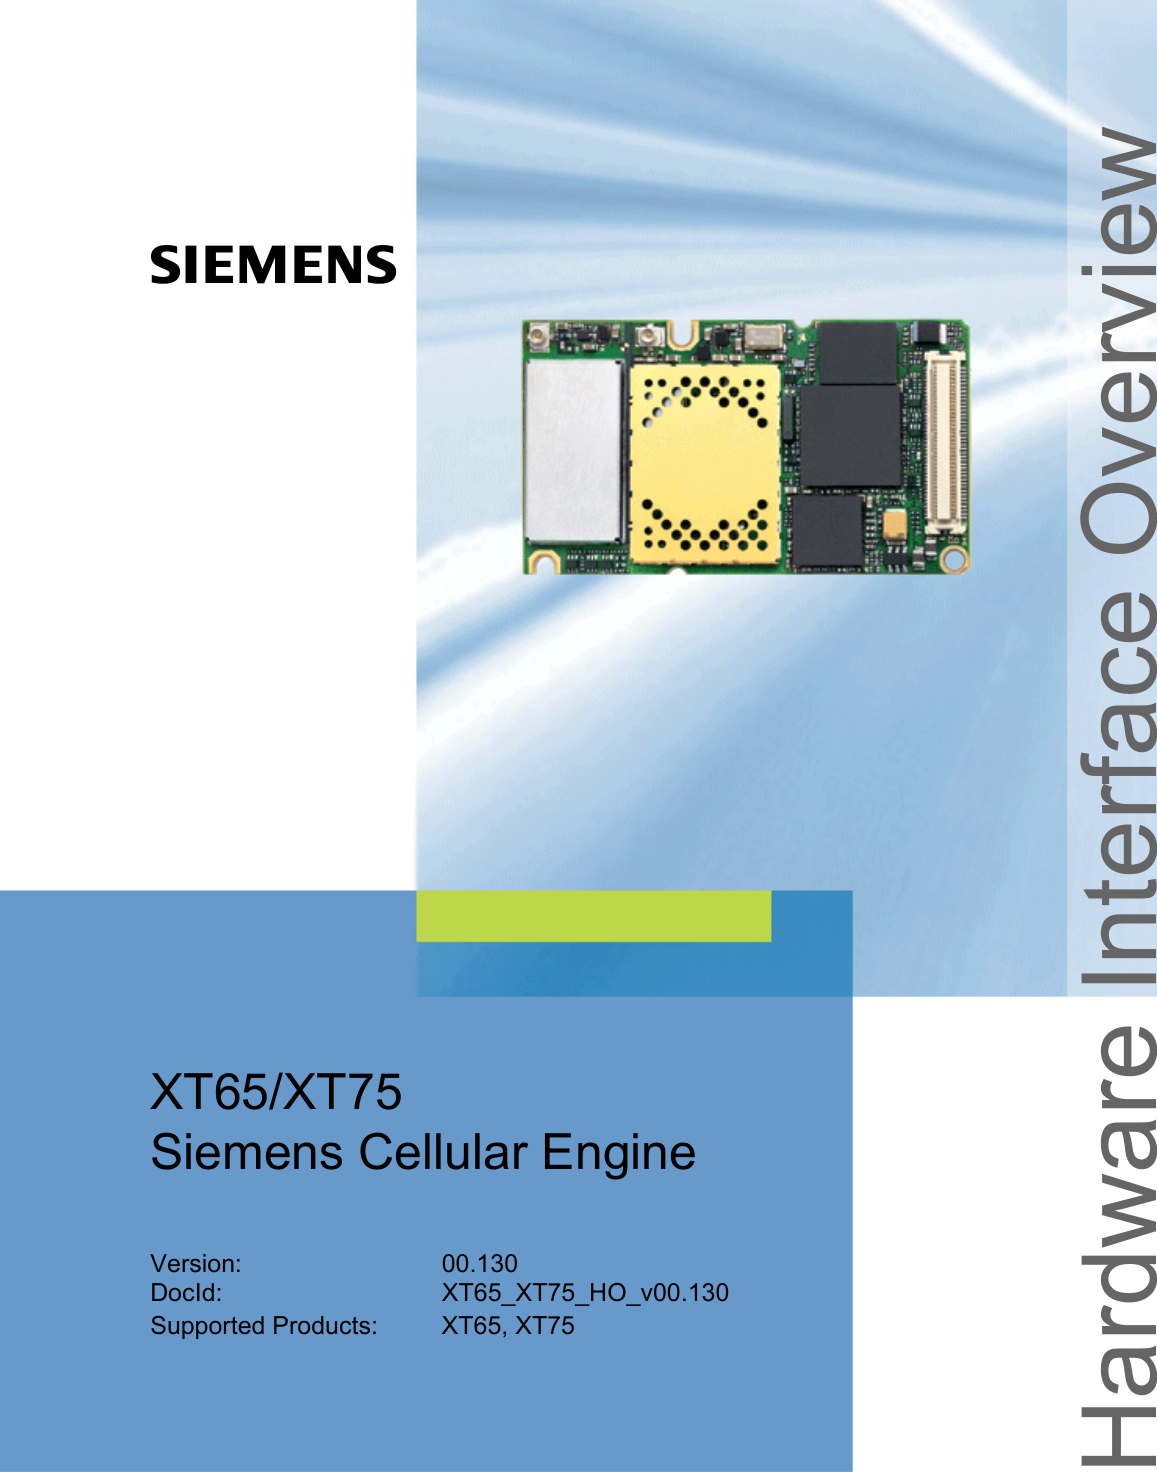 s   XT65/XT75 Siemens Cellular EngineVersion: 00.130DocId: XT65_XT75_HO_v00.130Supported Products: XT65, XT75Hardware Interface Overview